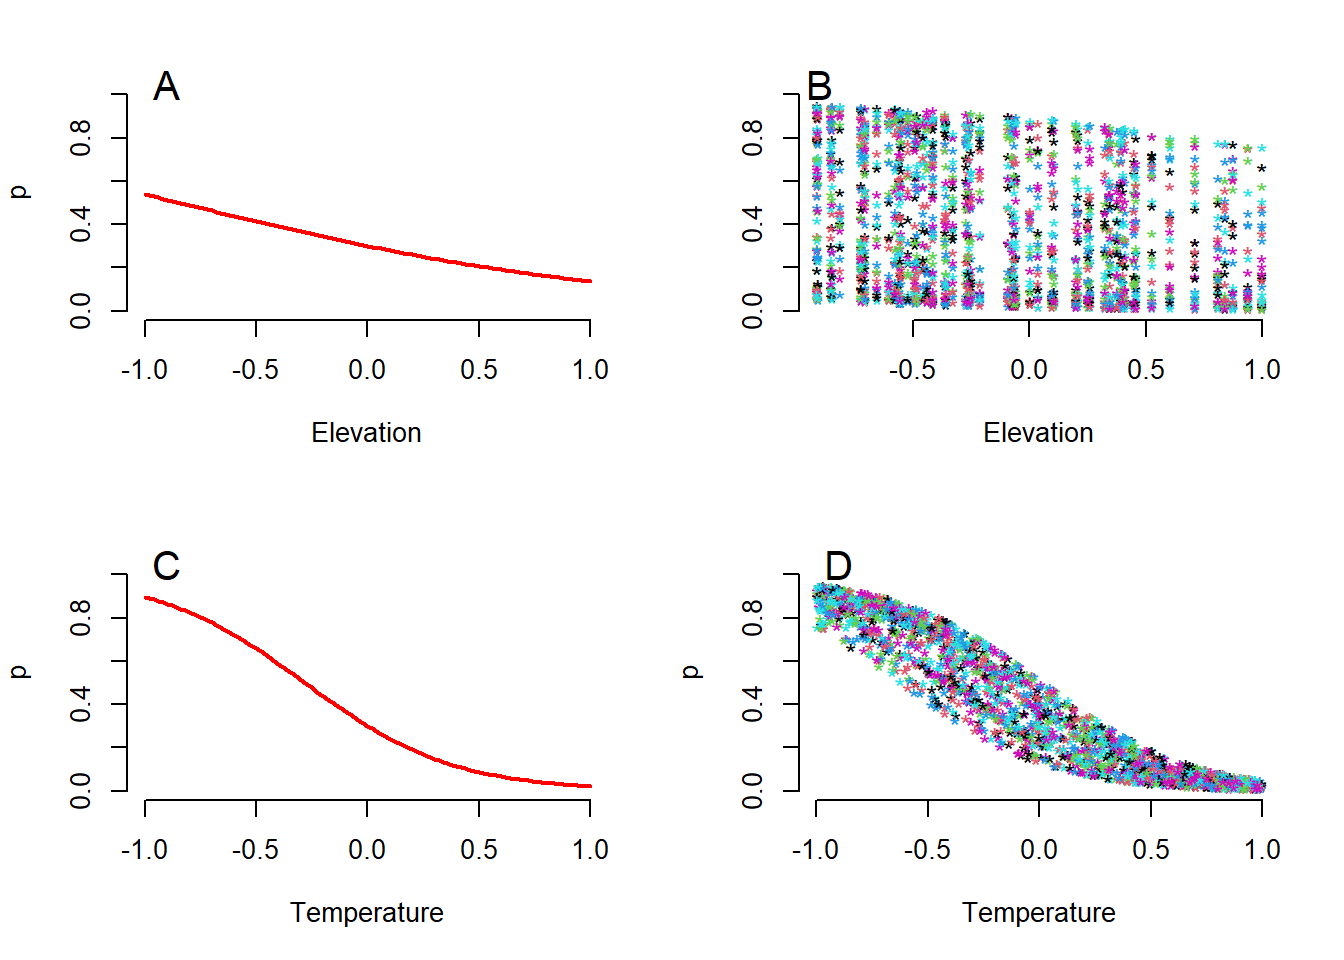 Two ways to show the relationships between the expected detection probability of the tapir (_p_) and the two variables elevation and temperature. (A) Relationship _p_ and elevation for constant temperature (at the mean value, which is equal to zero). (B) Relationship between _p_ and elevation in the observed value of temperature quantity. (C) Relationship between _p_ and temperature for a constant value of elevation (at mean elevation equal to zero). (D) Relationship between _p_ and temperature for an observed value of elevation.